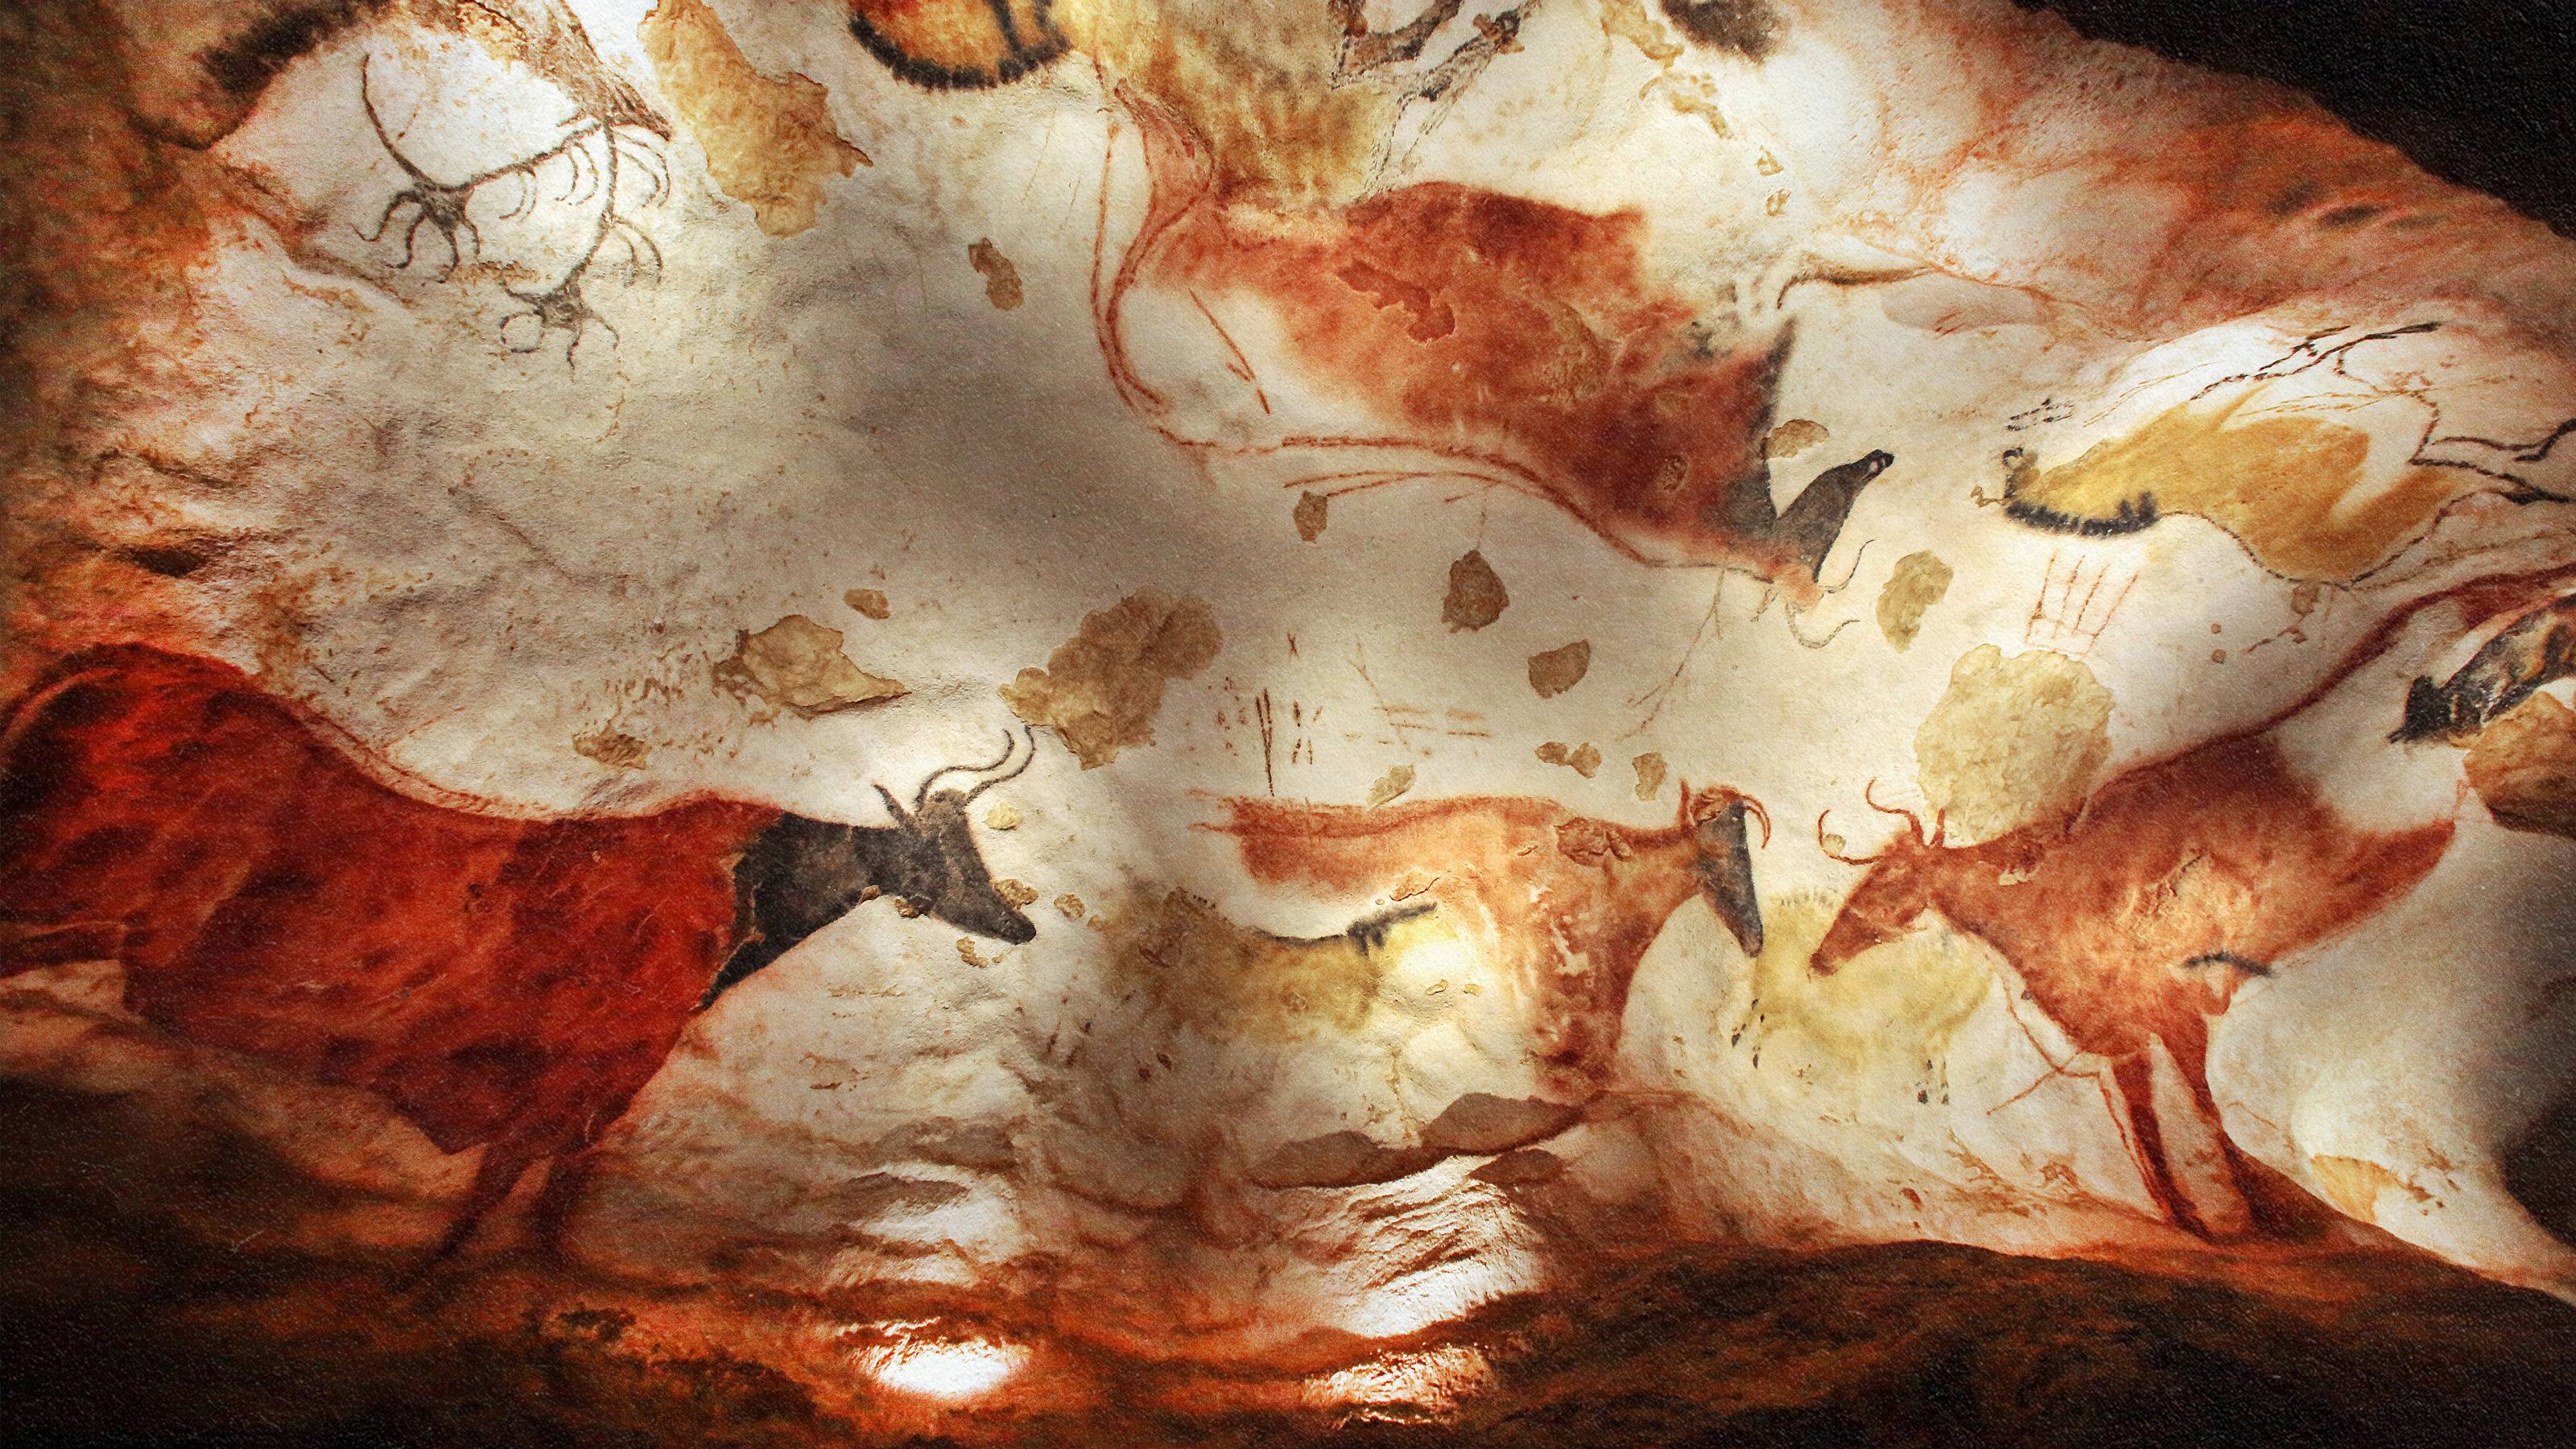 A scientifically-inspired painting of animals in a cave.